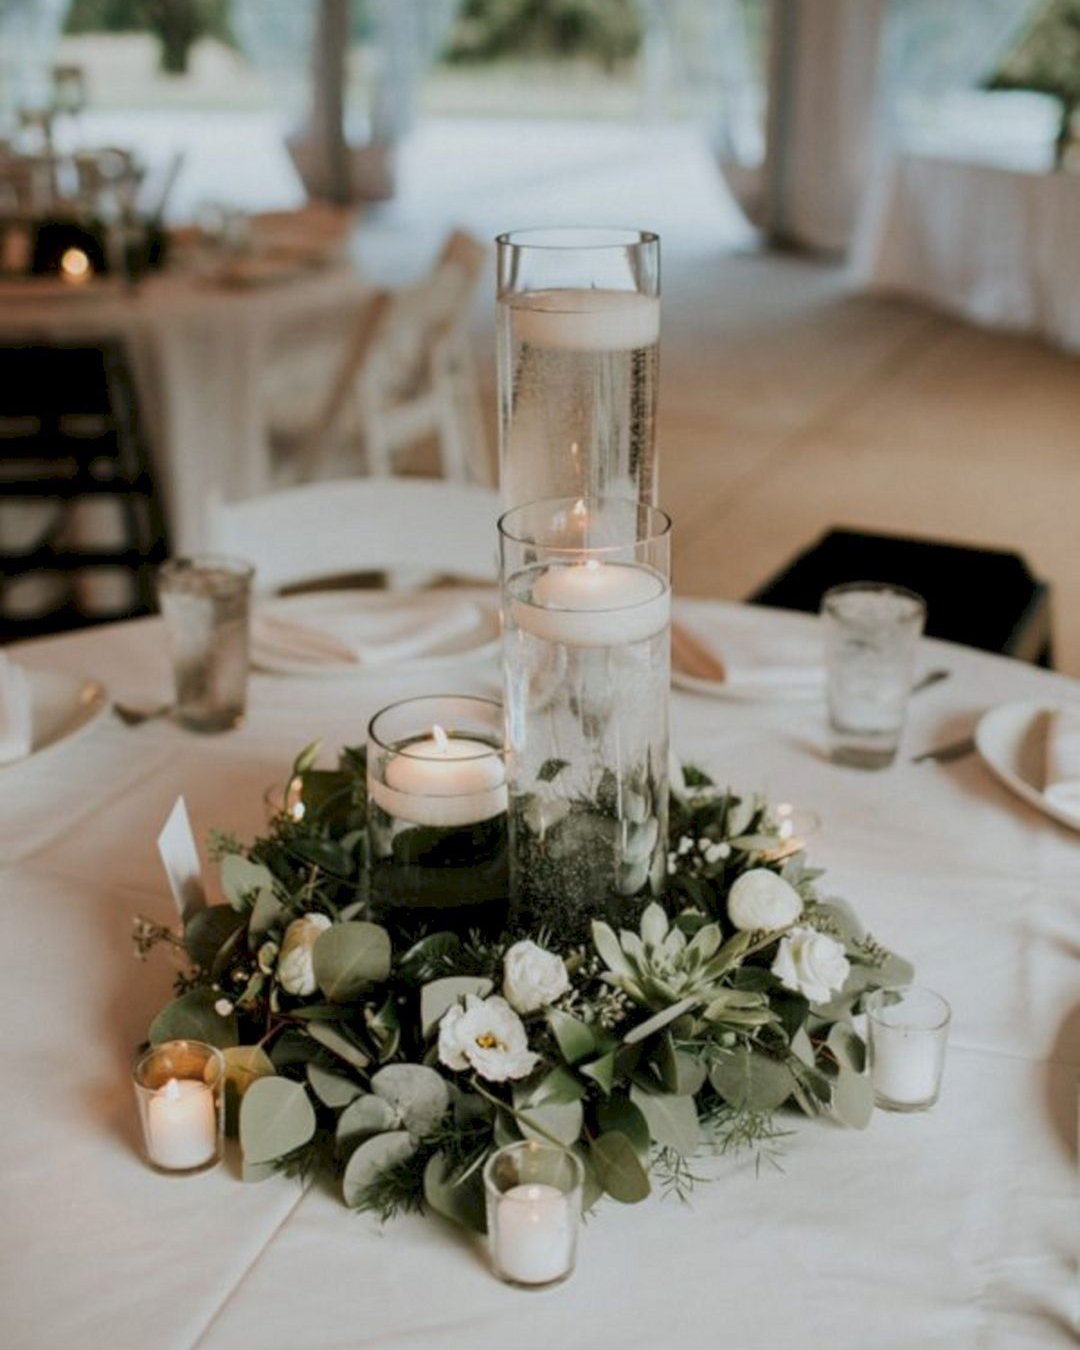 wedding table decorations greenry and candles lauren louise photography